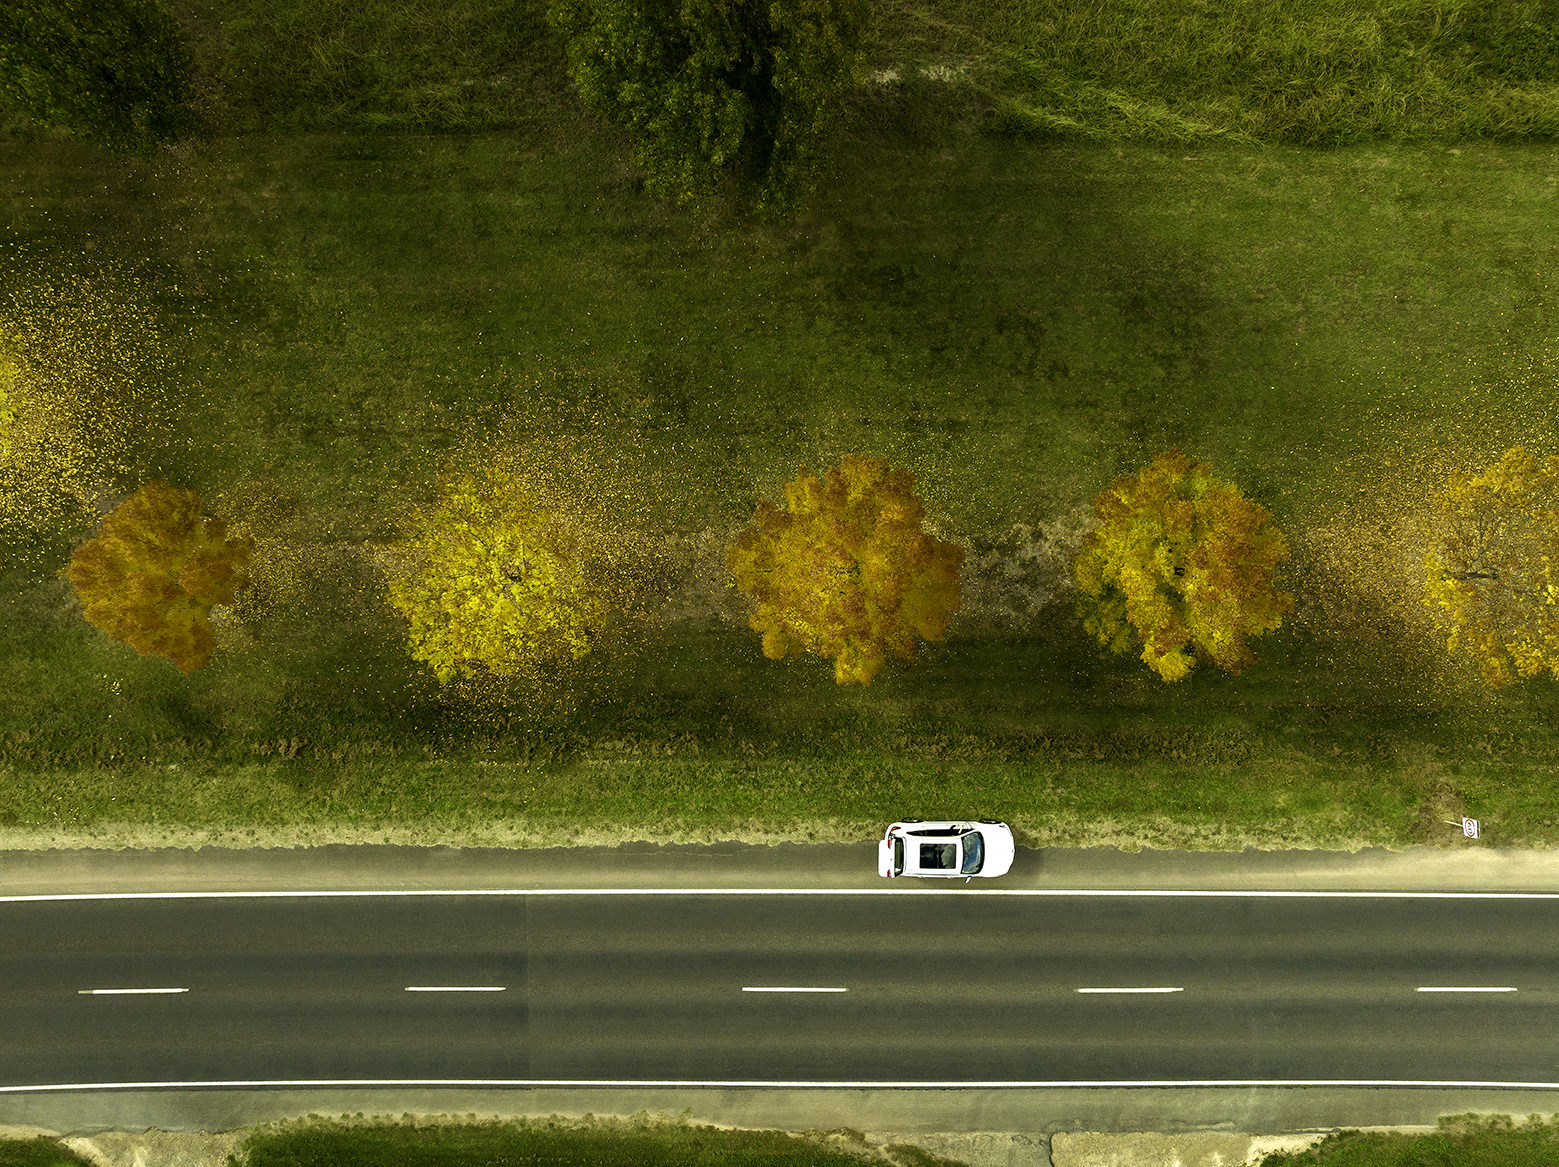 Aerial photography of car drives through road next to trees